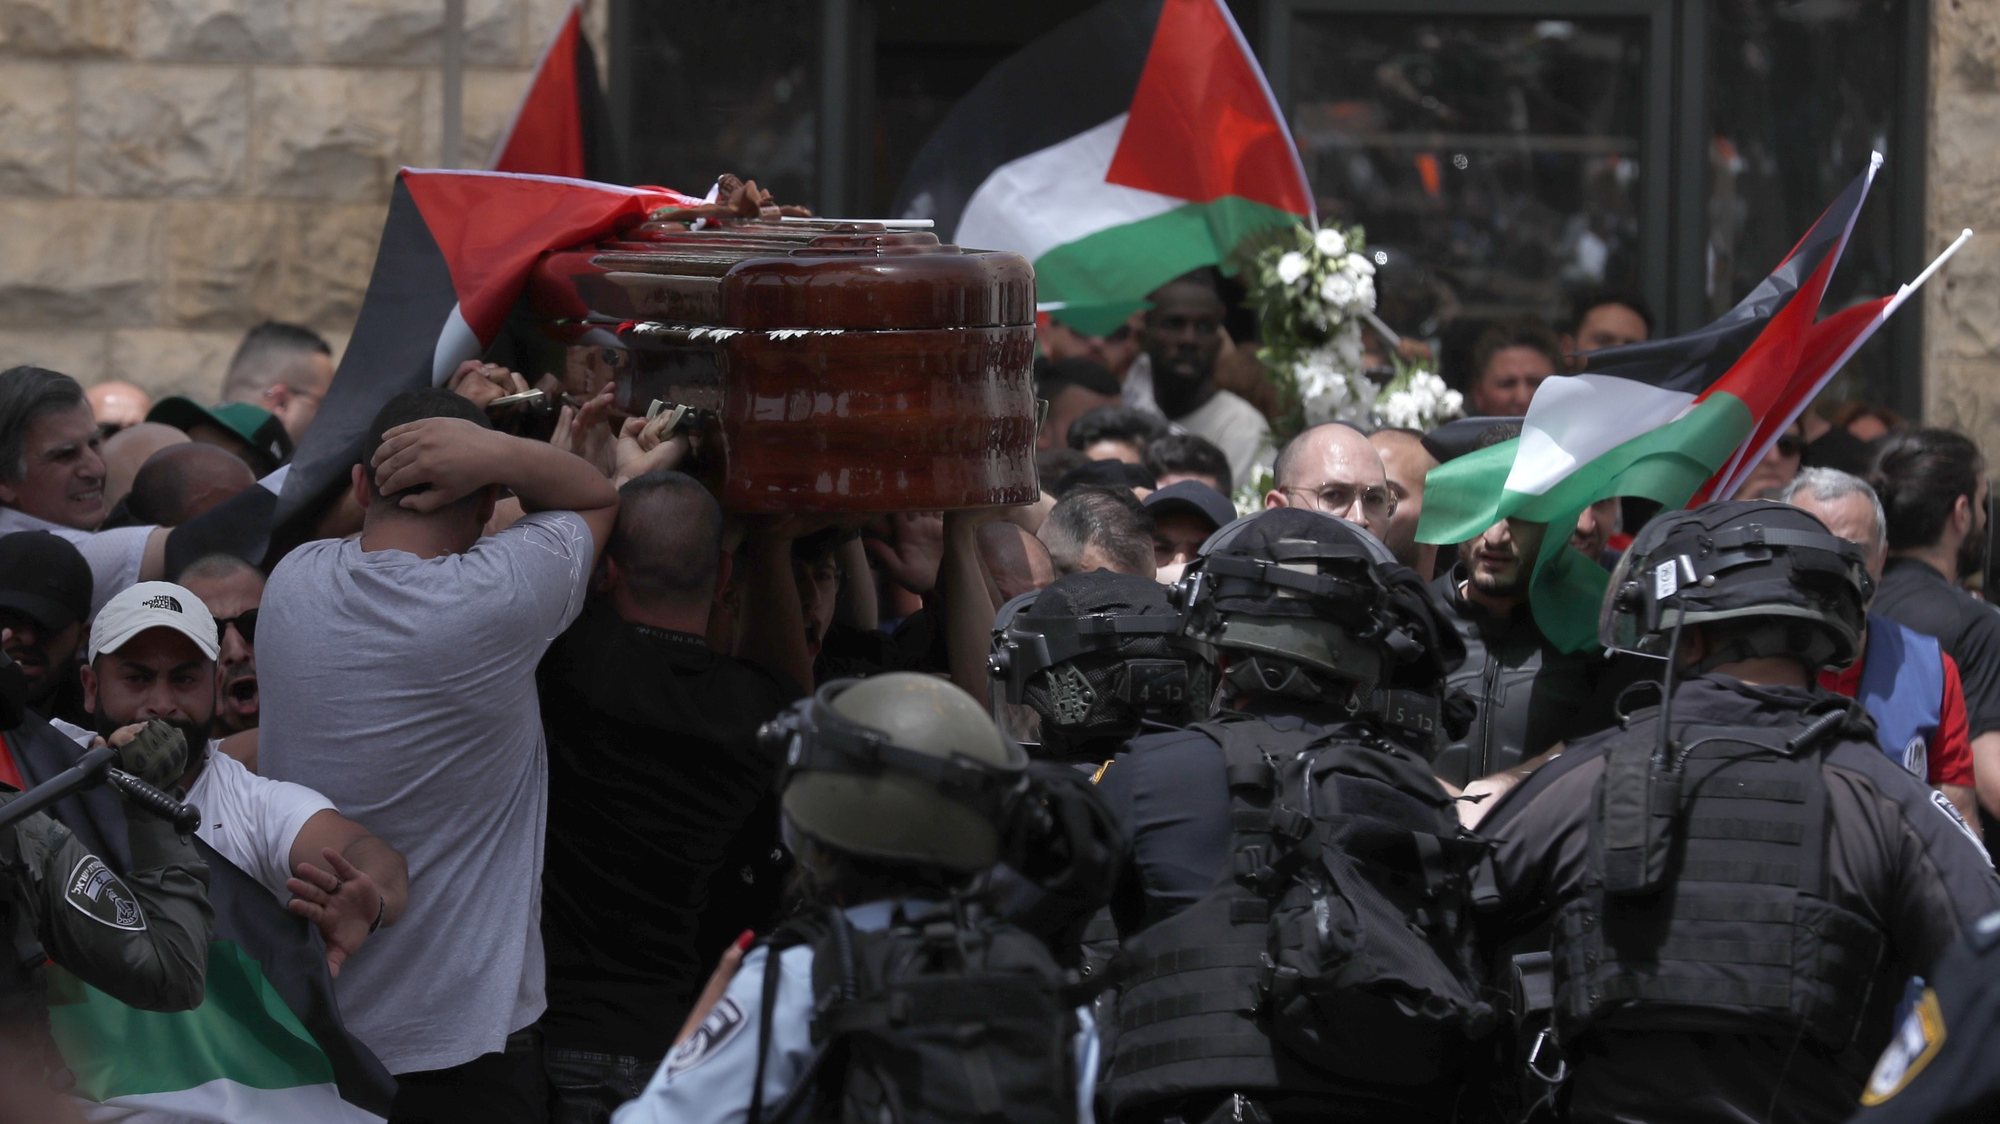 epa09944328 Mourners carry the coffin of slain American-Palestinian journalist Shireen Abu Akleh outside St. Joseph Hospital, ahead of a funeral procession in the Old City of Jerusalem, 13 May 2022. Al Jazeera journalist Shireen Abu Akleh was killed on 11 May 2022 during a raid by Israeli forces in the West Bank town of Jenin.  EPA/ATEF SAFADI